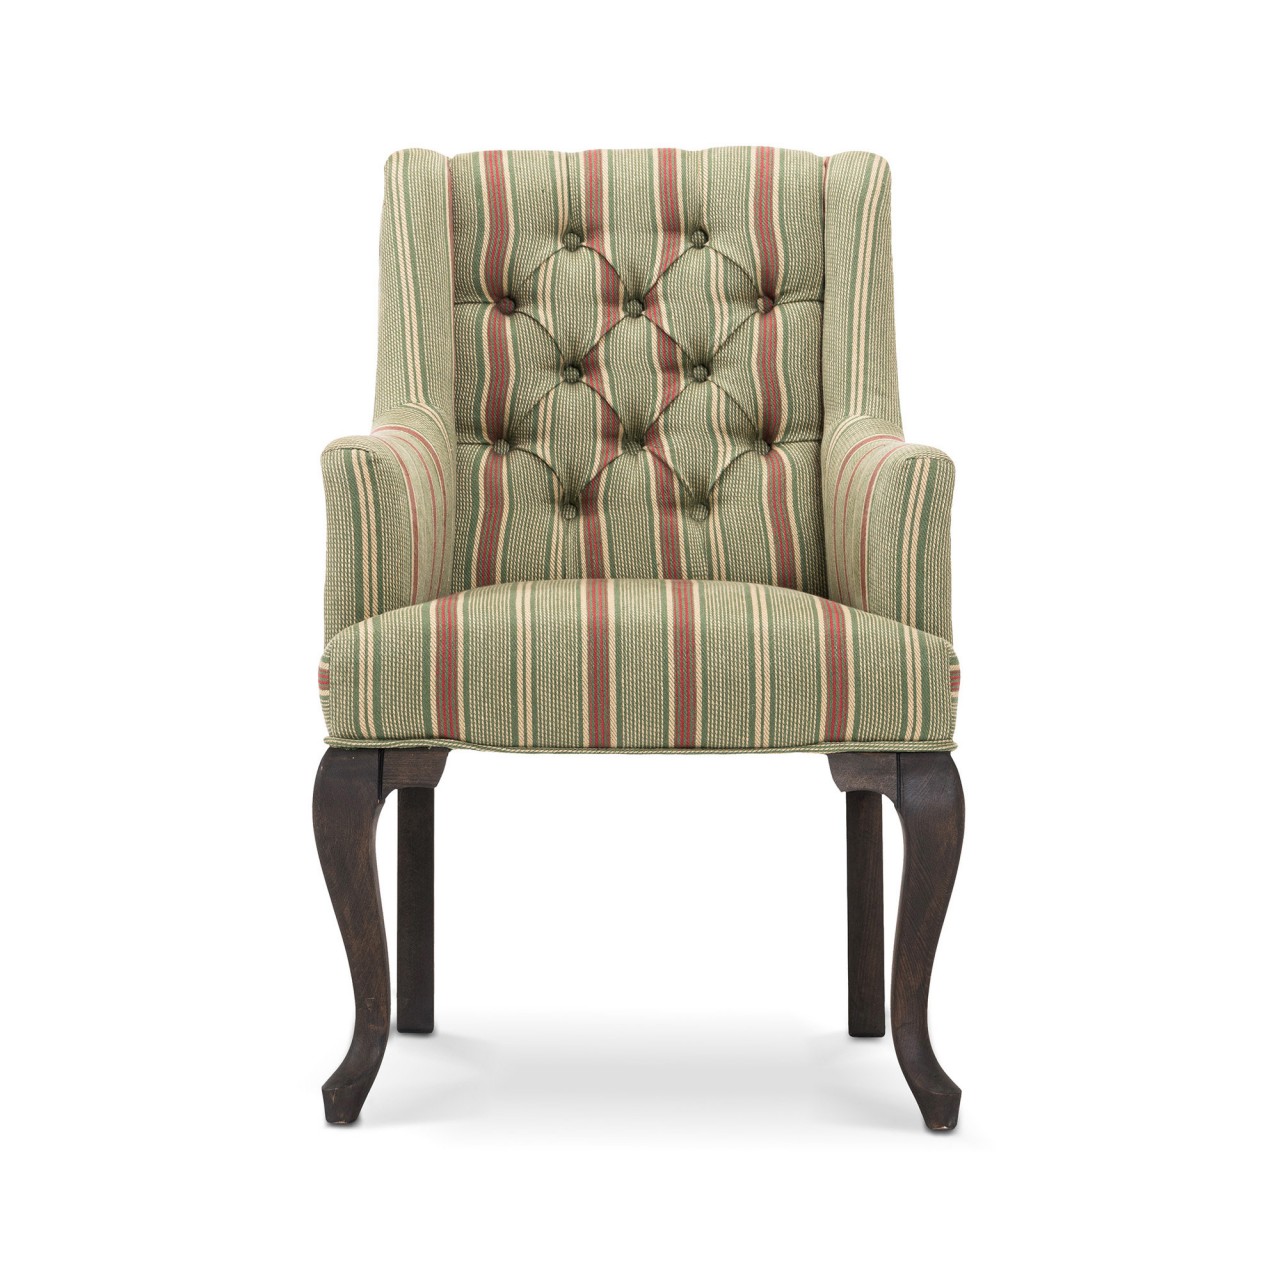 FITZROY TUFTED CHAIR - TYROLEAN STRIPES linen